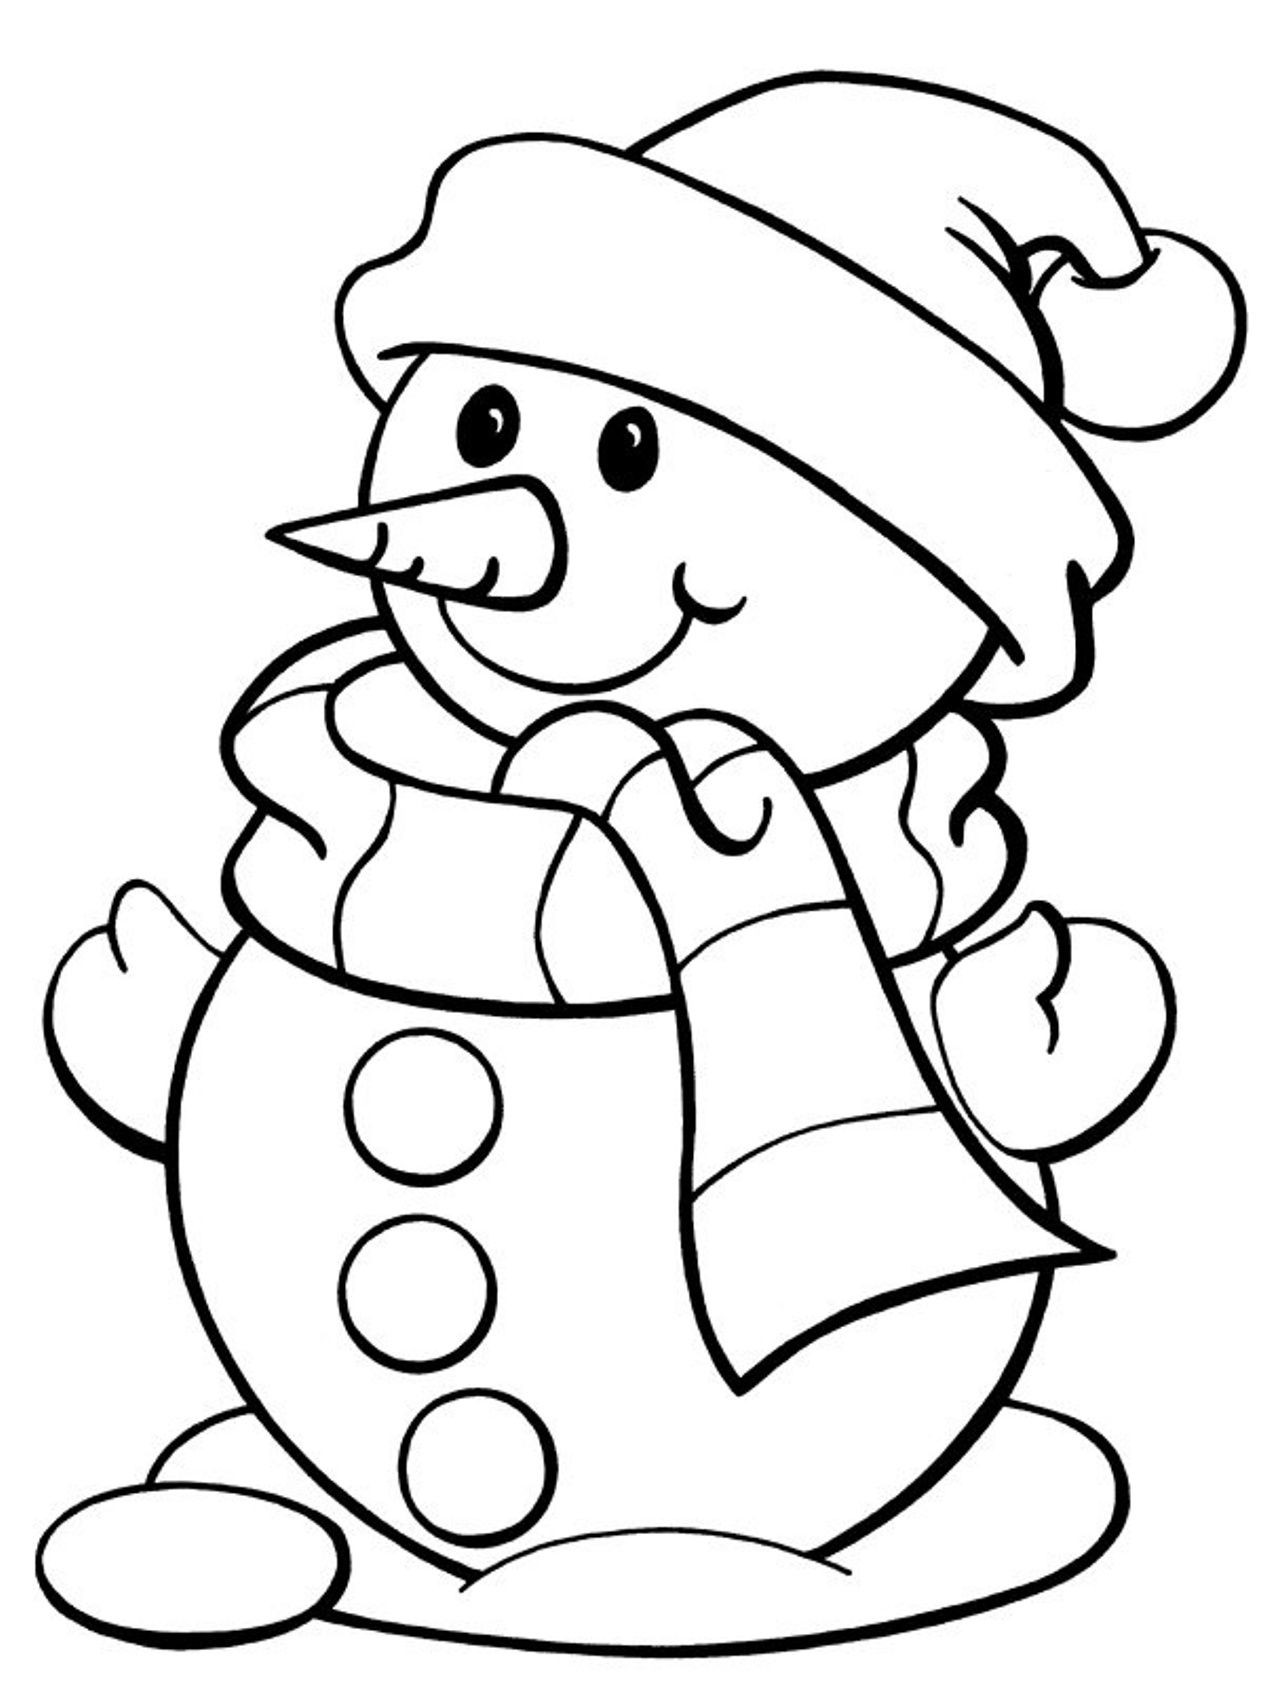 Winter Coloring Pages For Kids
 Free Printable Winter Coloring Pages For Kids